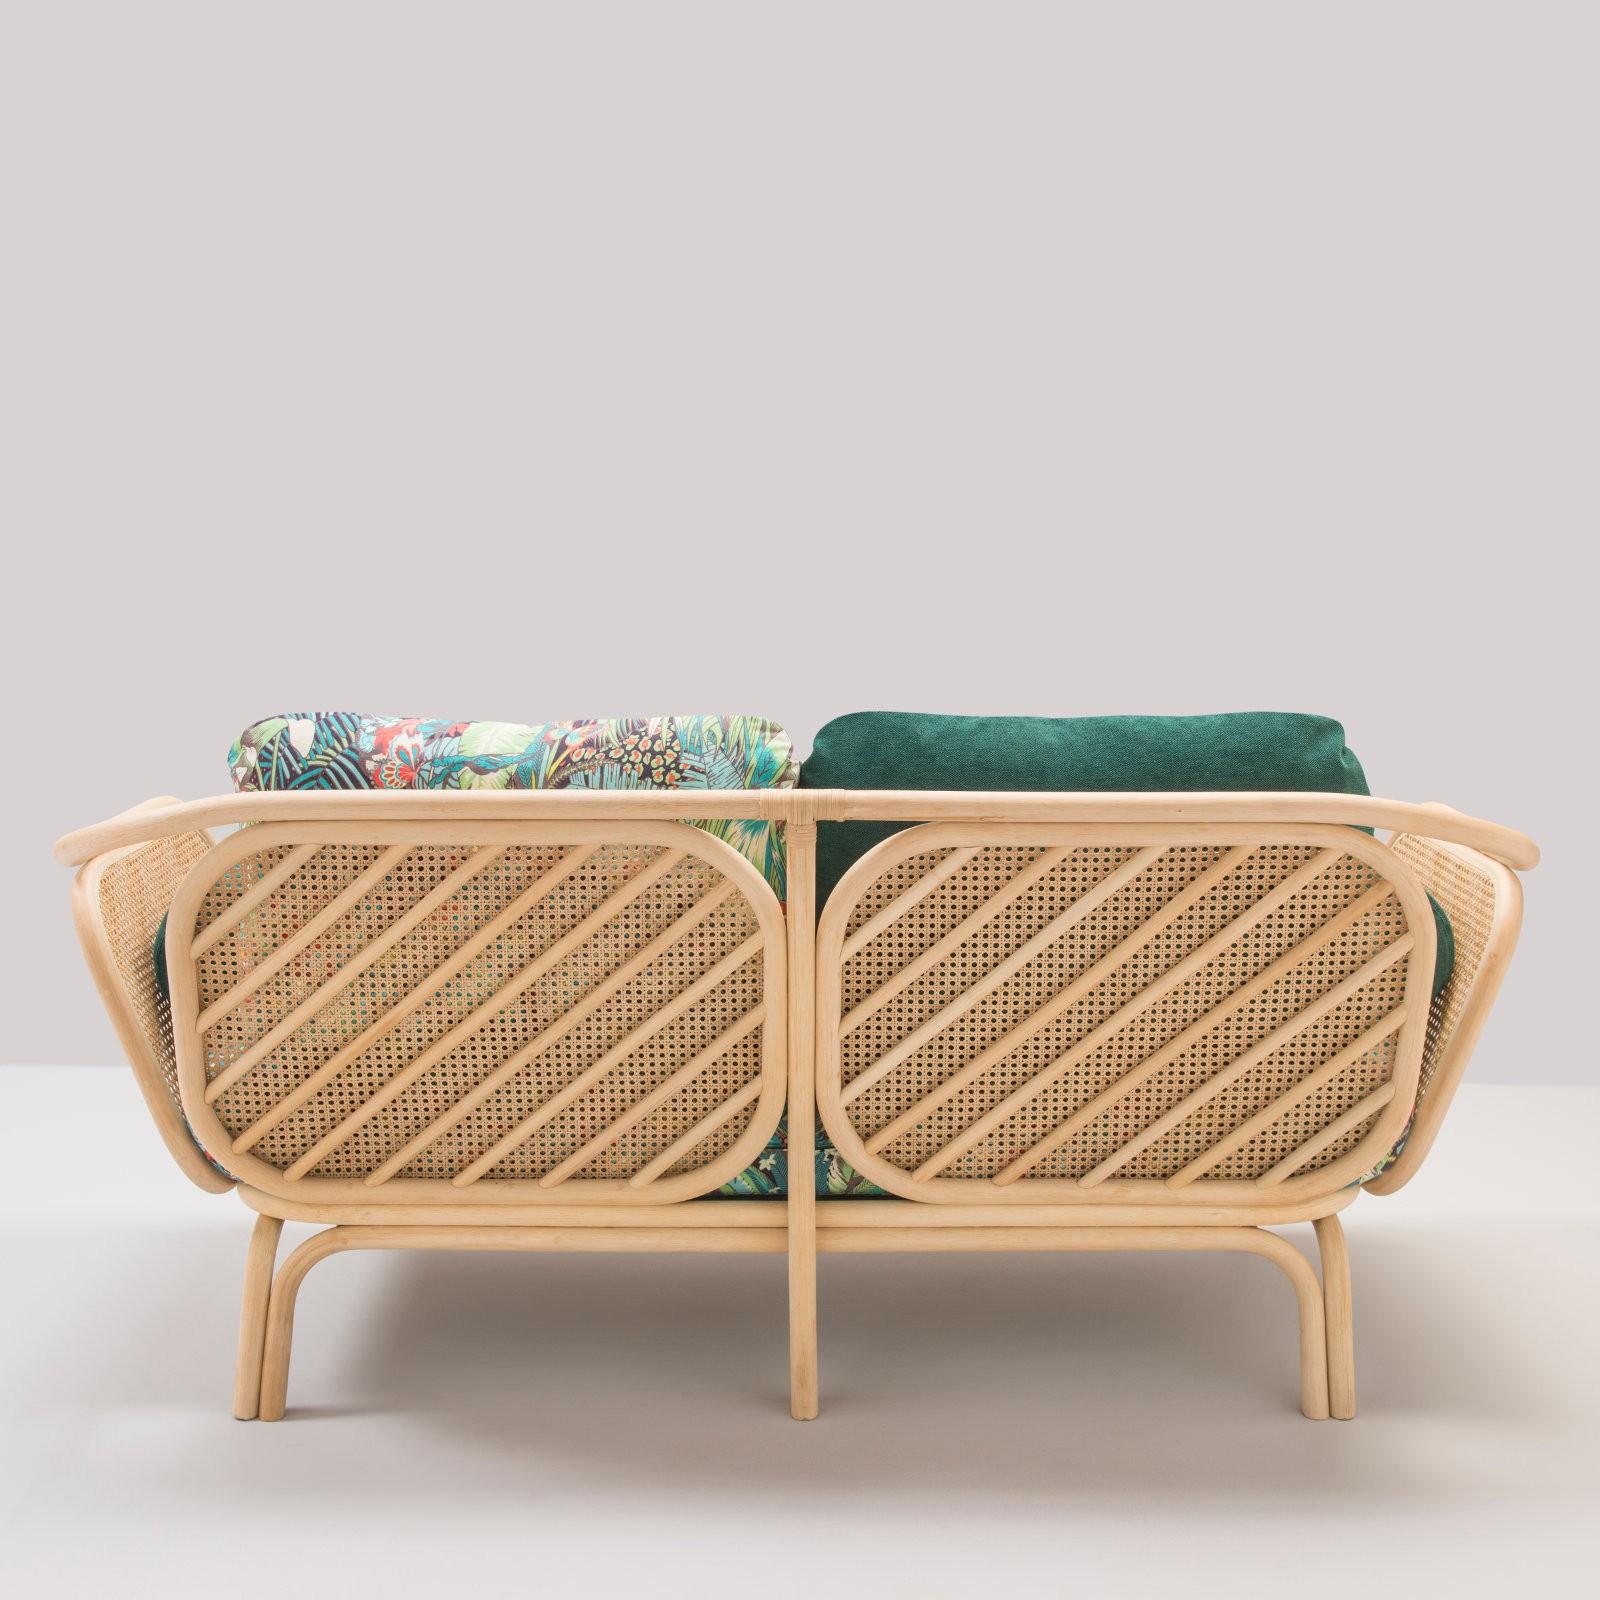 Timeless and airy lines, trendy and graphic design for this French sofa composed of a robust rattan structure decorated with caned windows and gorgeous fabric (new item, never used).